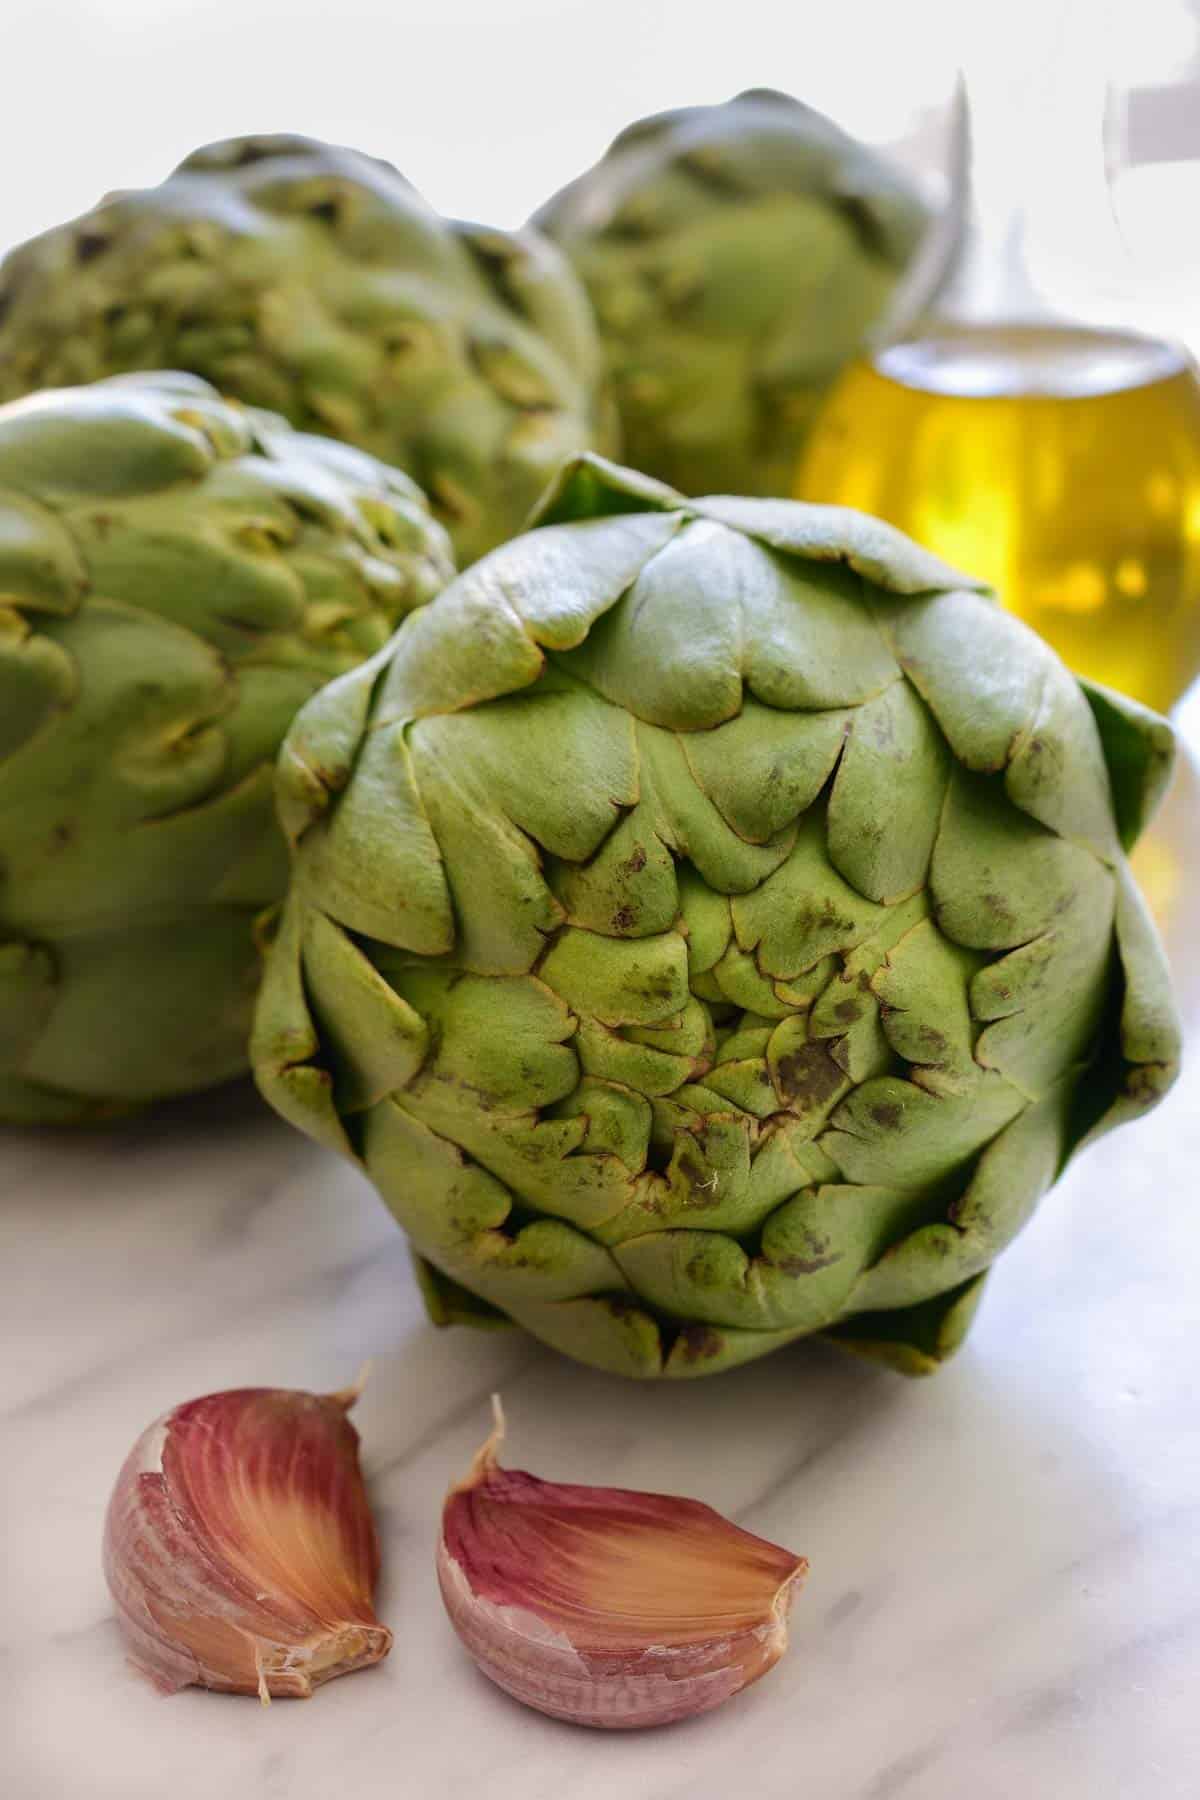 Fresh artichokes on a counter with two cloves of garlic and a jar of olive oil.